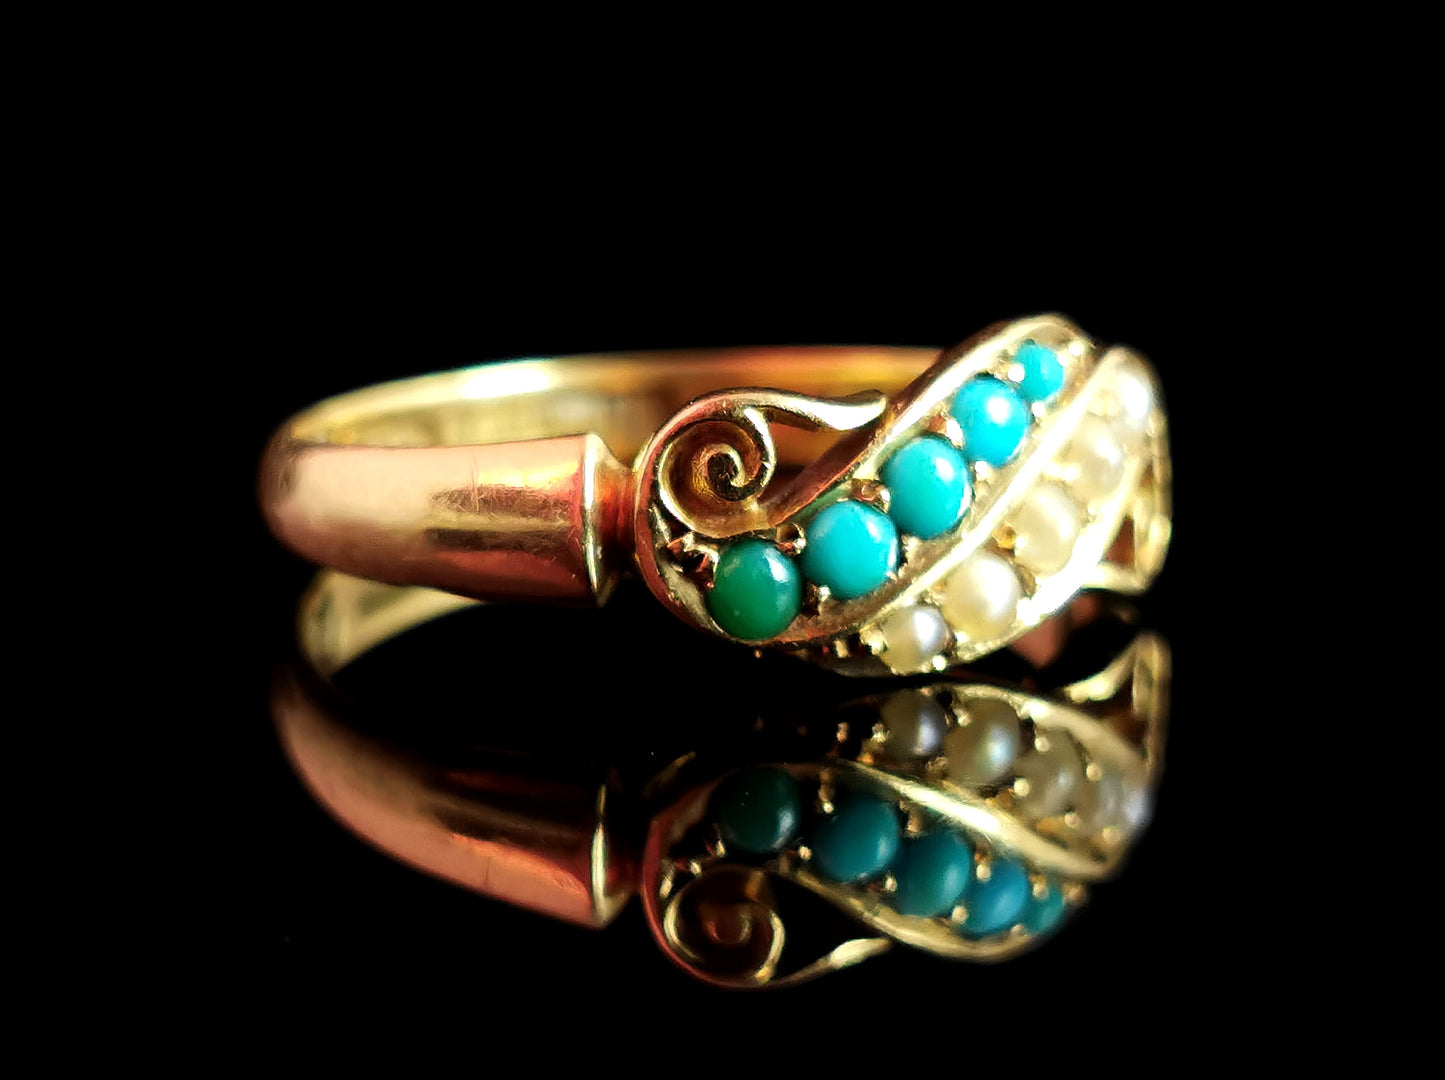 Antique Turquoise and pearl ring, 18ct gold, Victorian